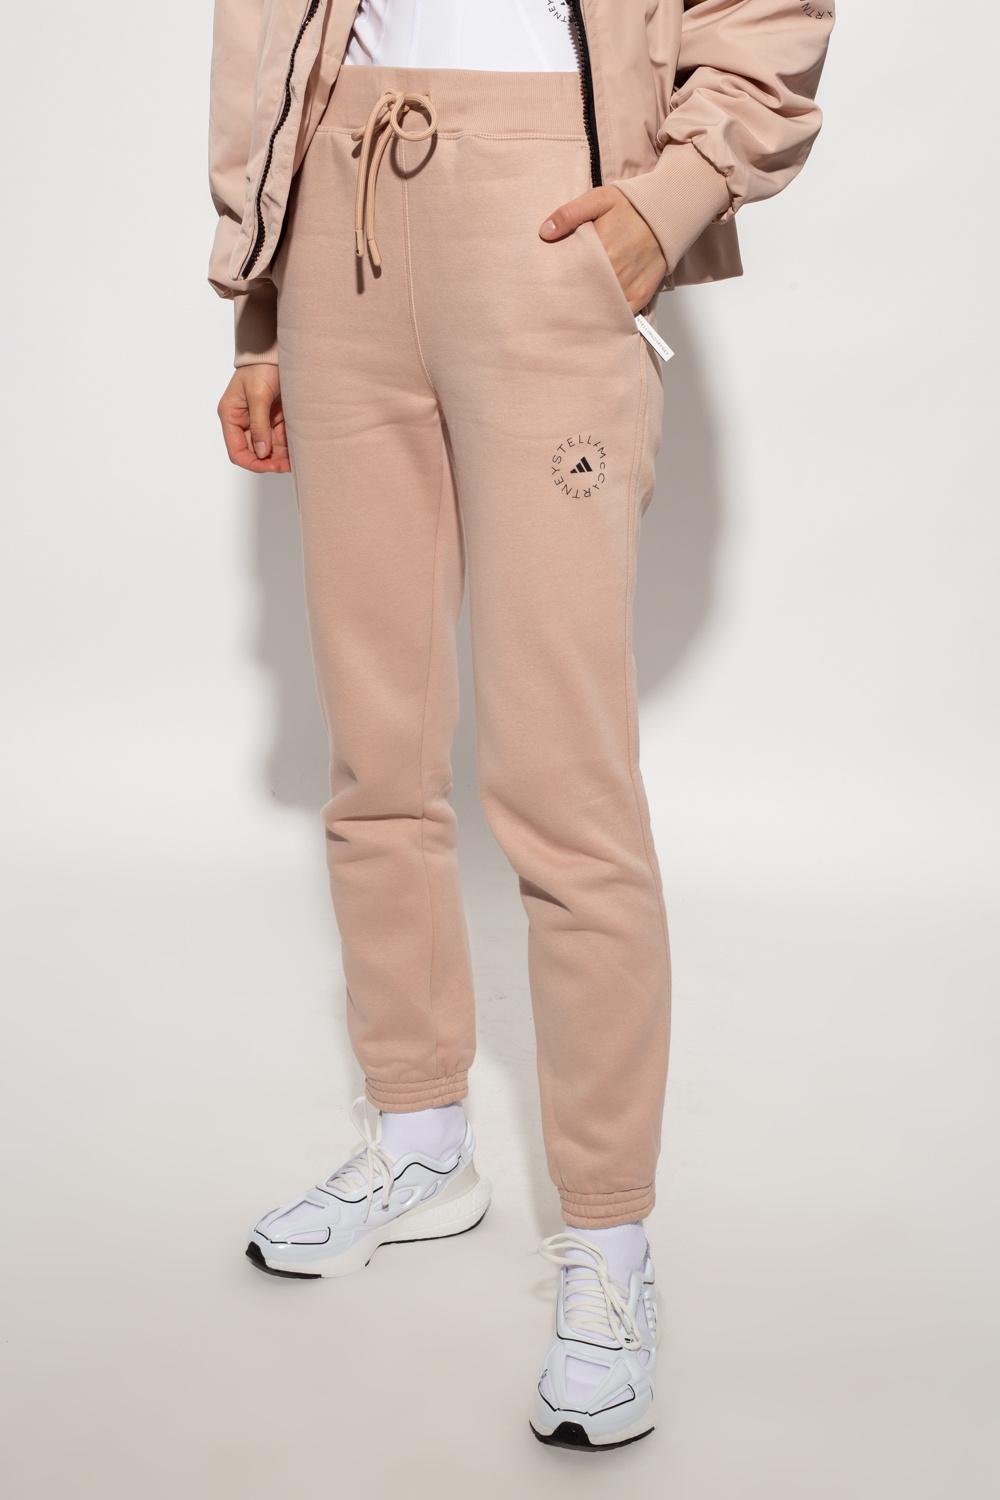 adidas By Stella McCartney Adidas Stella Mccartney 'agent Of Kindness '  Collection Sweatpants in Pink | Lyst